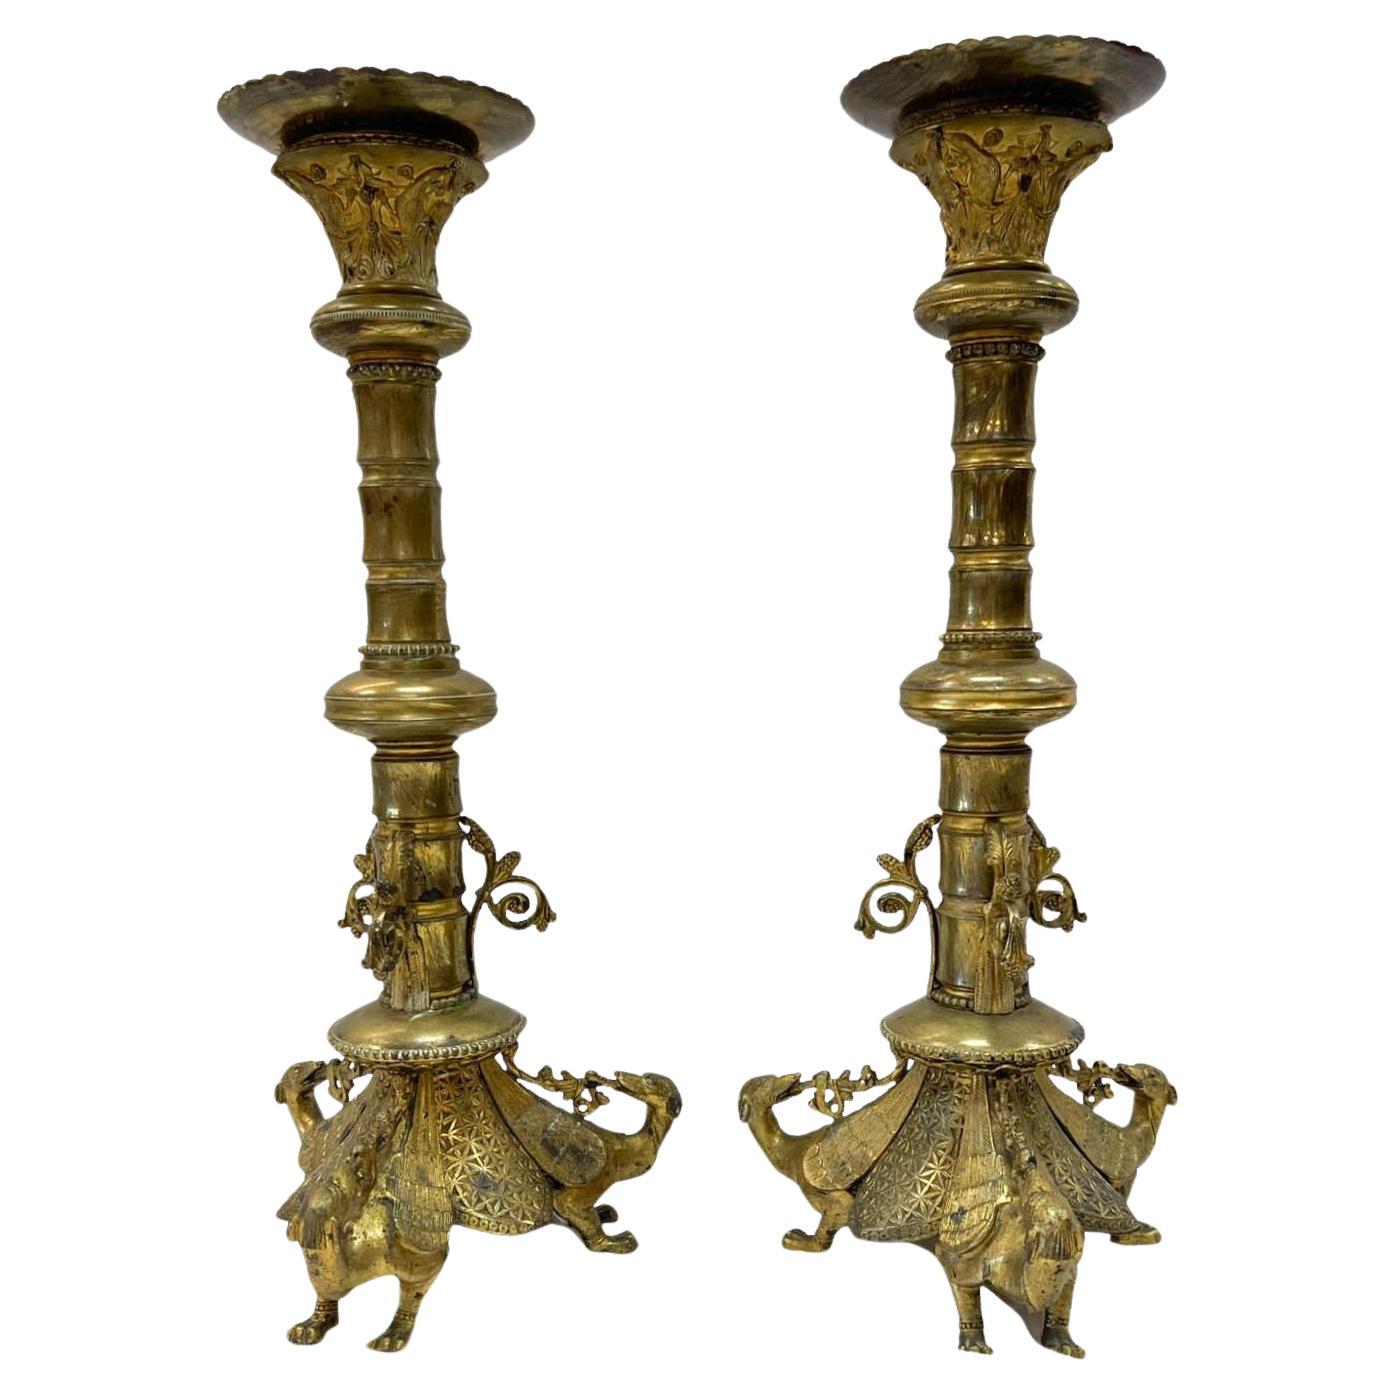 Pair of Antique Brass Gothic Candle Holders